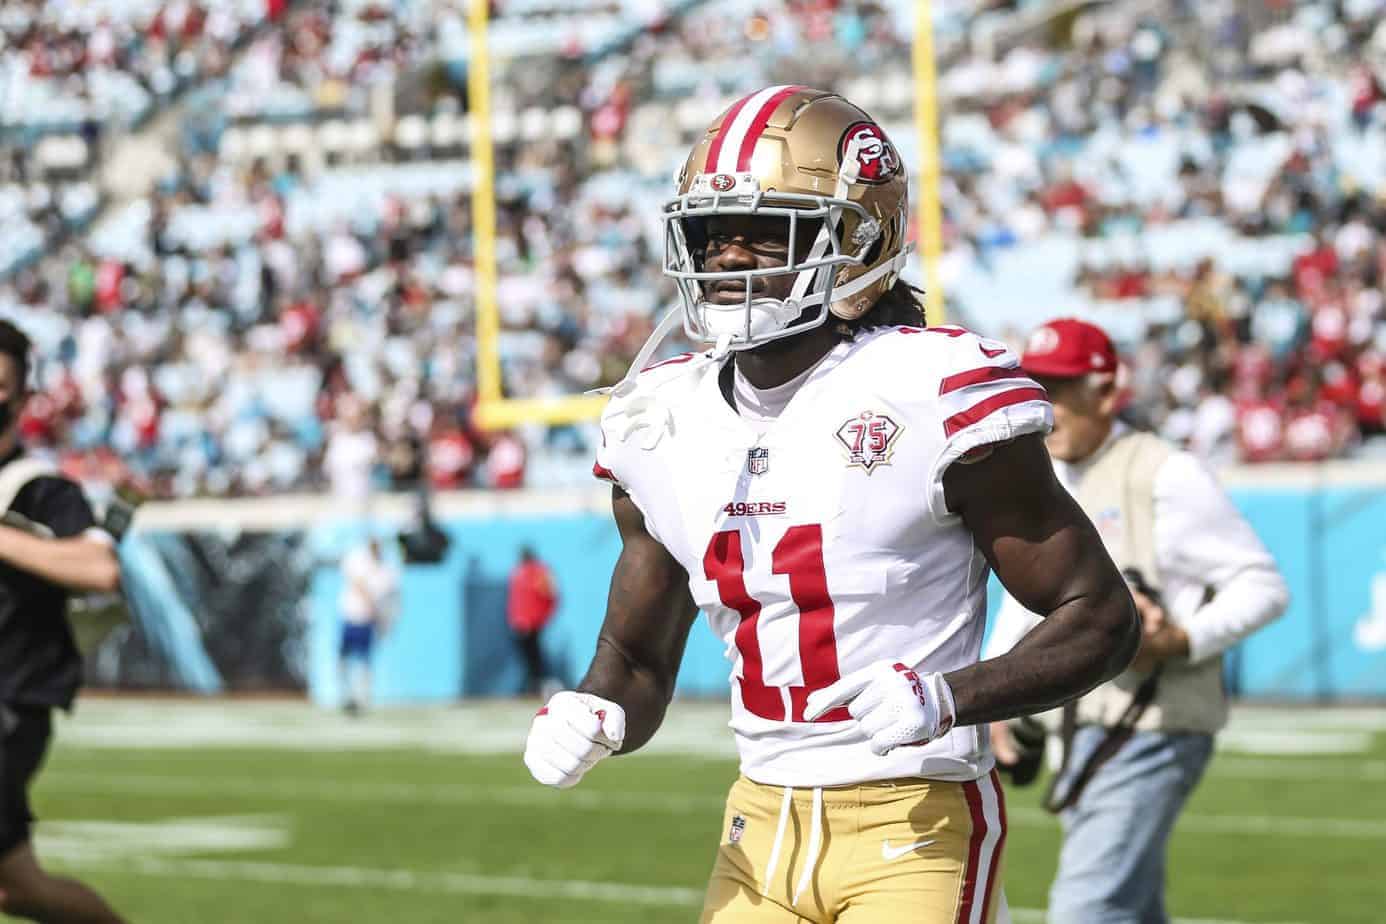 NFL Picks and parlays best NFL bets betting picks player props today tonight NFC Divisional Round Playoffs 49ers vs. Packers player props bets NFL Picks & Parlays: Free Niners vs. Packers Same Game Parlay Predictions